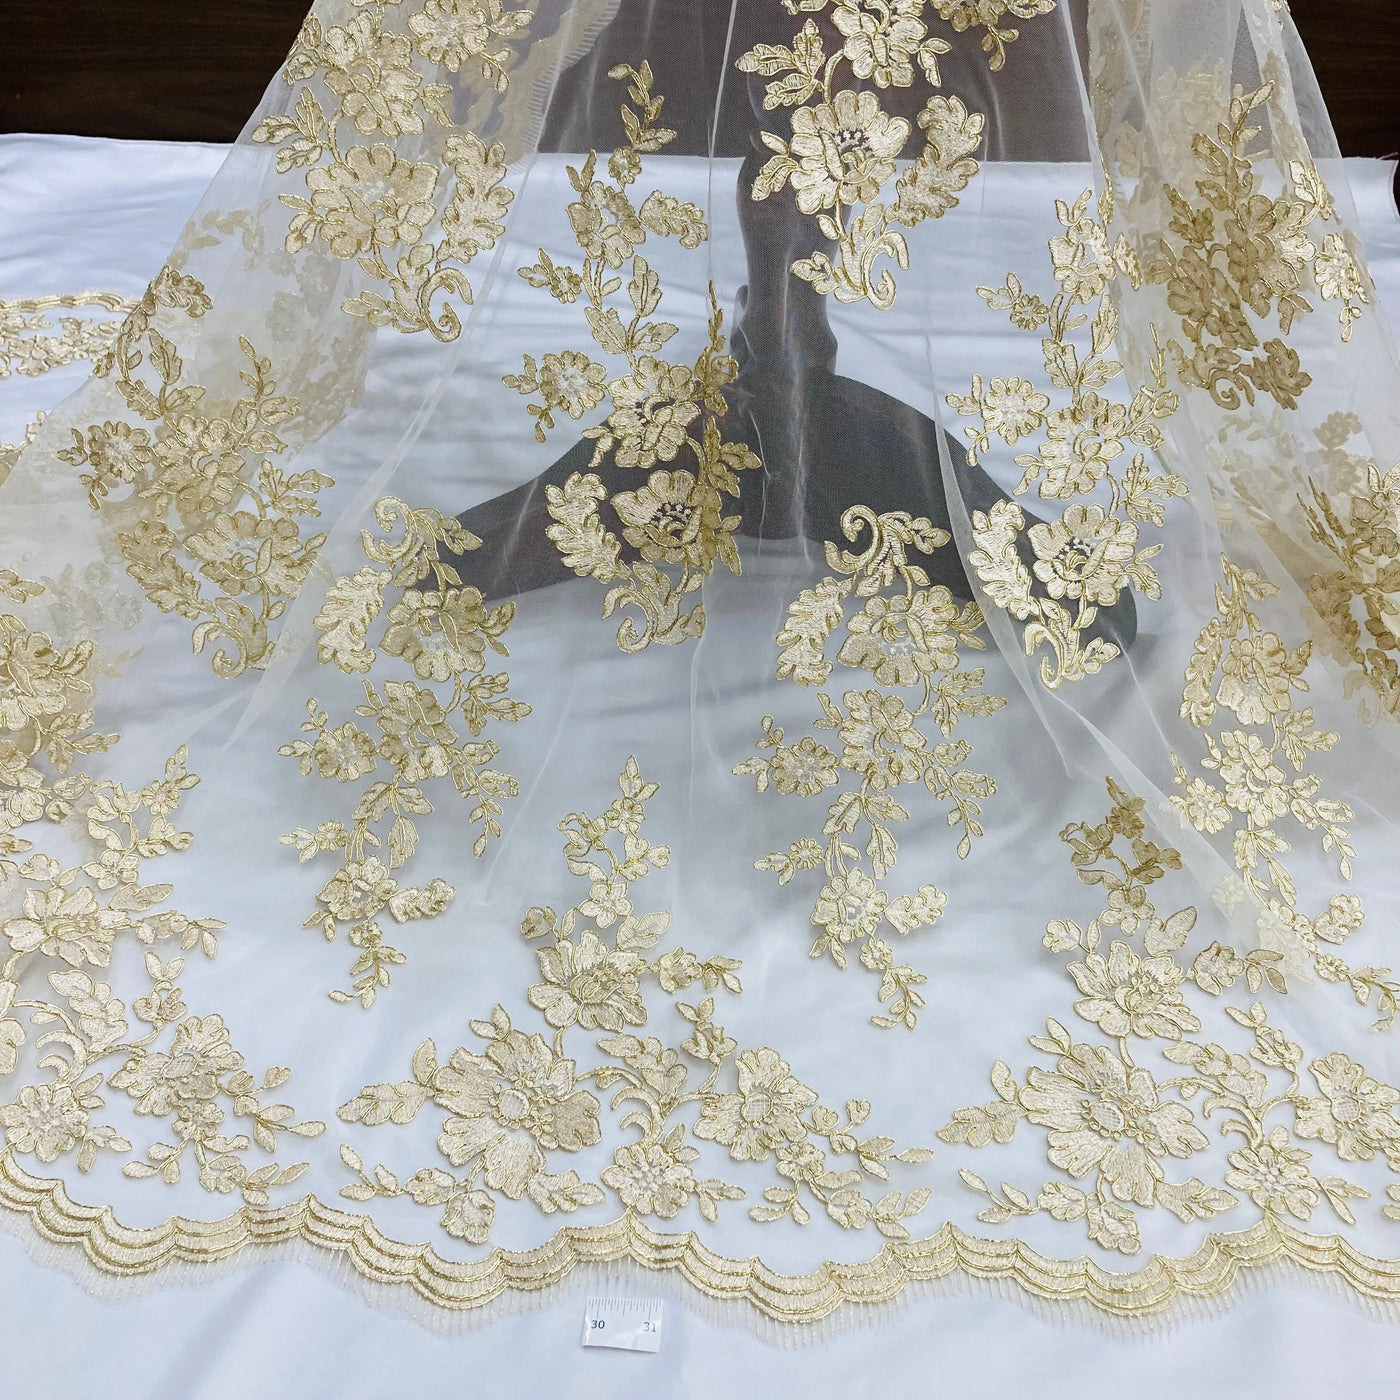 Corded Bridal Lace Fabric Embroidered on Poly Net Mesh. Lace USA